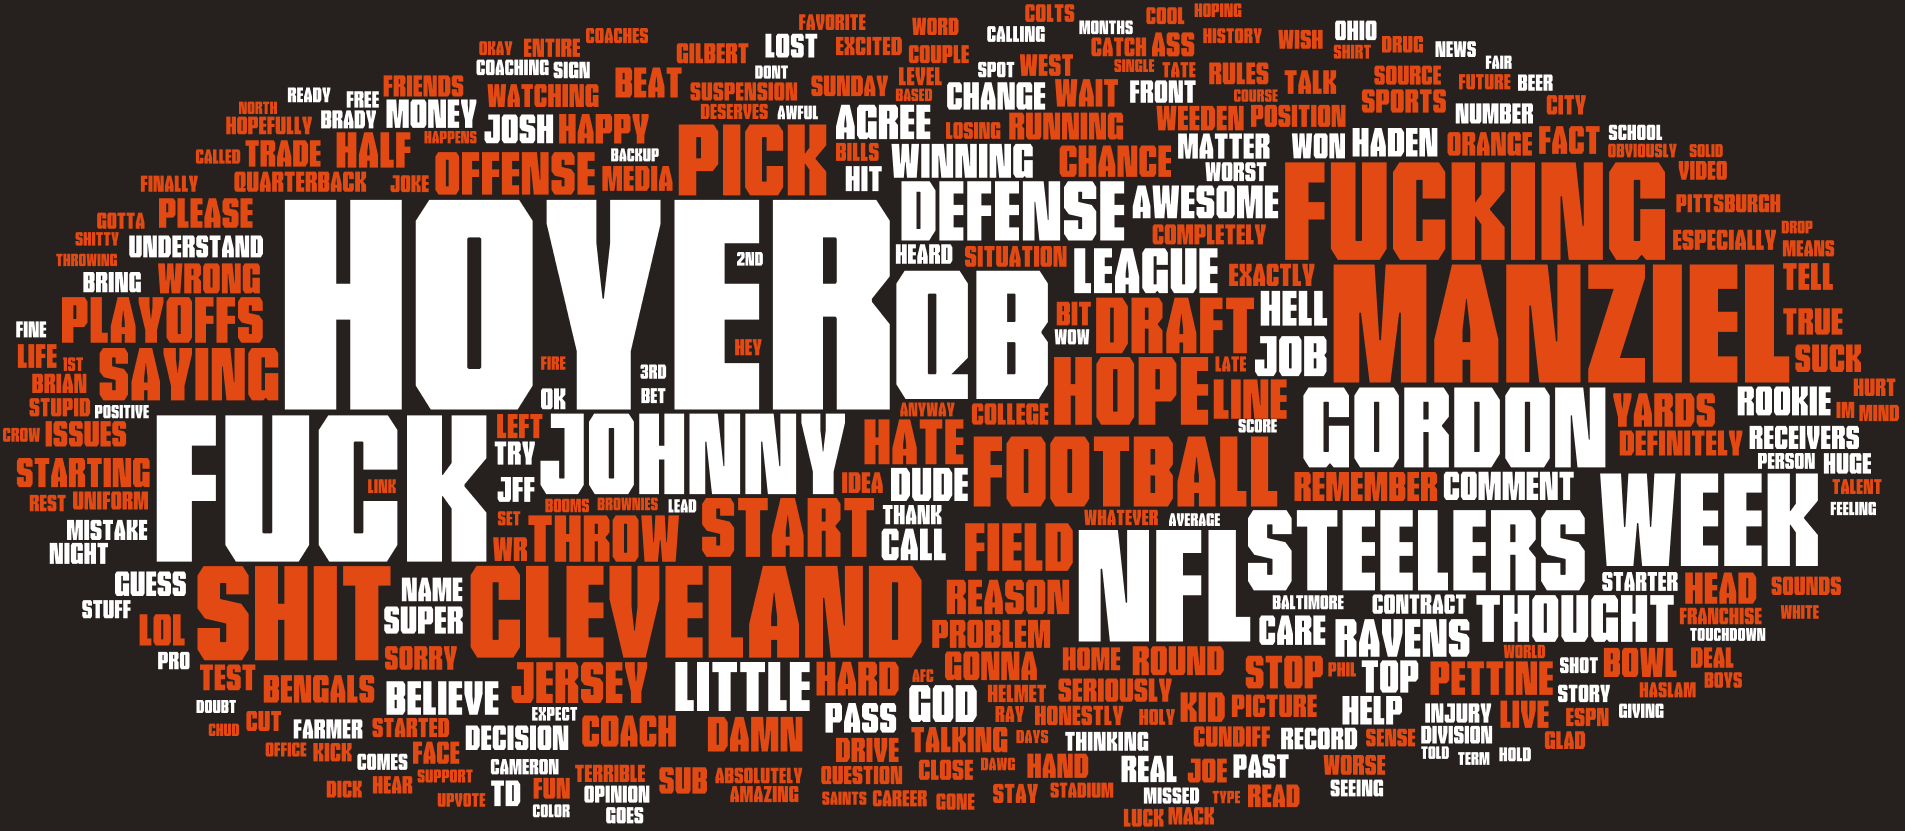 Words Used by NFL Fans in 2014 - @NFLRT